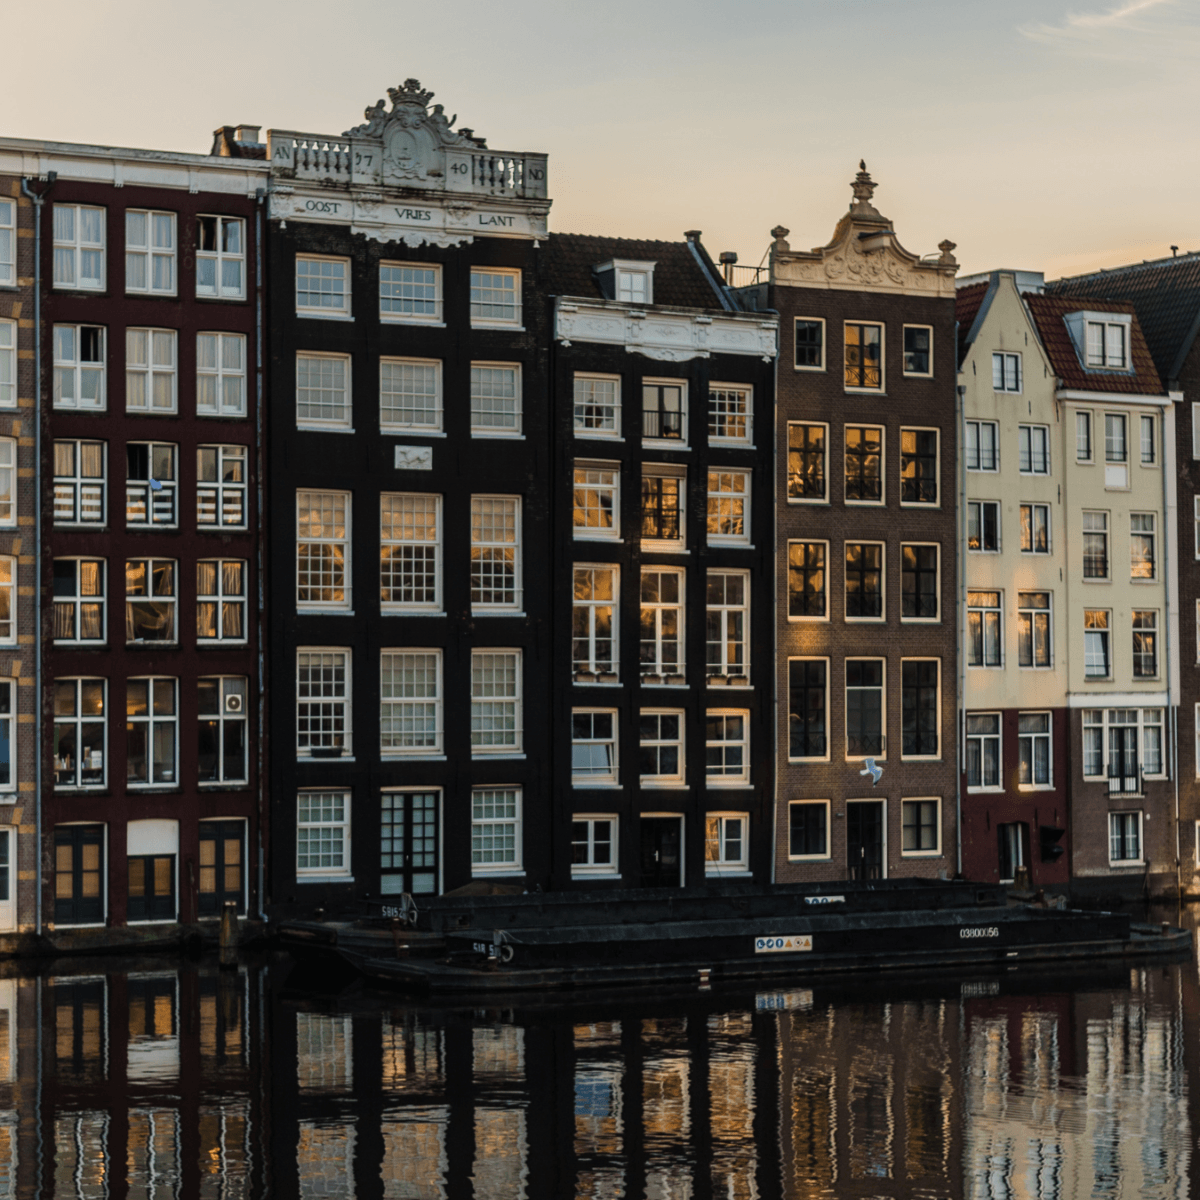 Houses next to the canal in Amsterdam